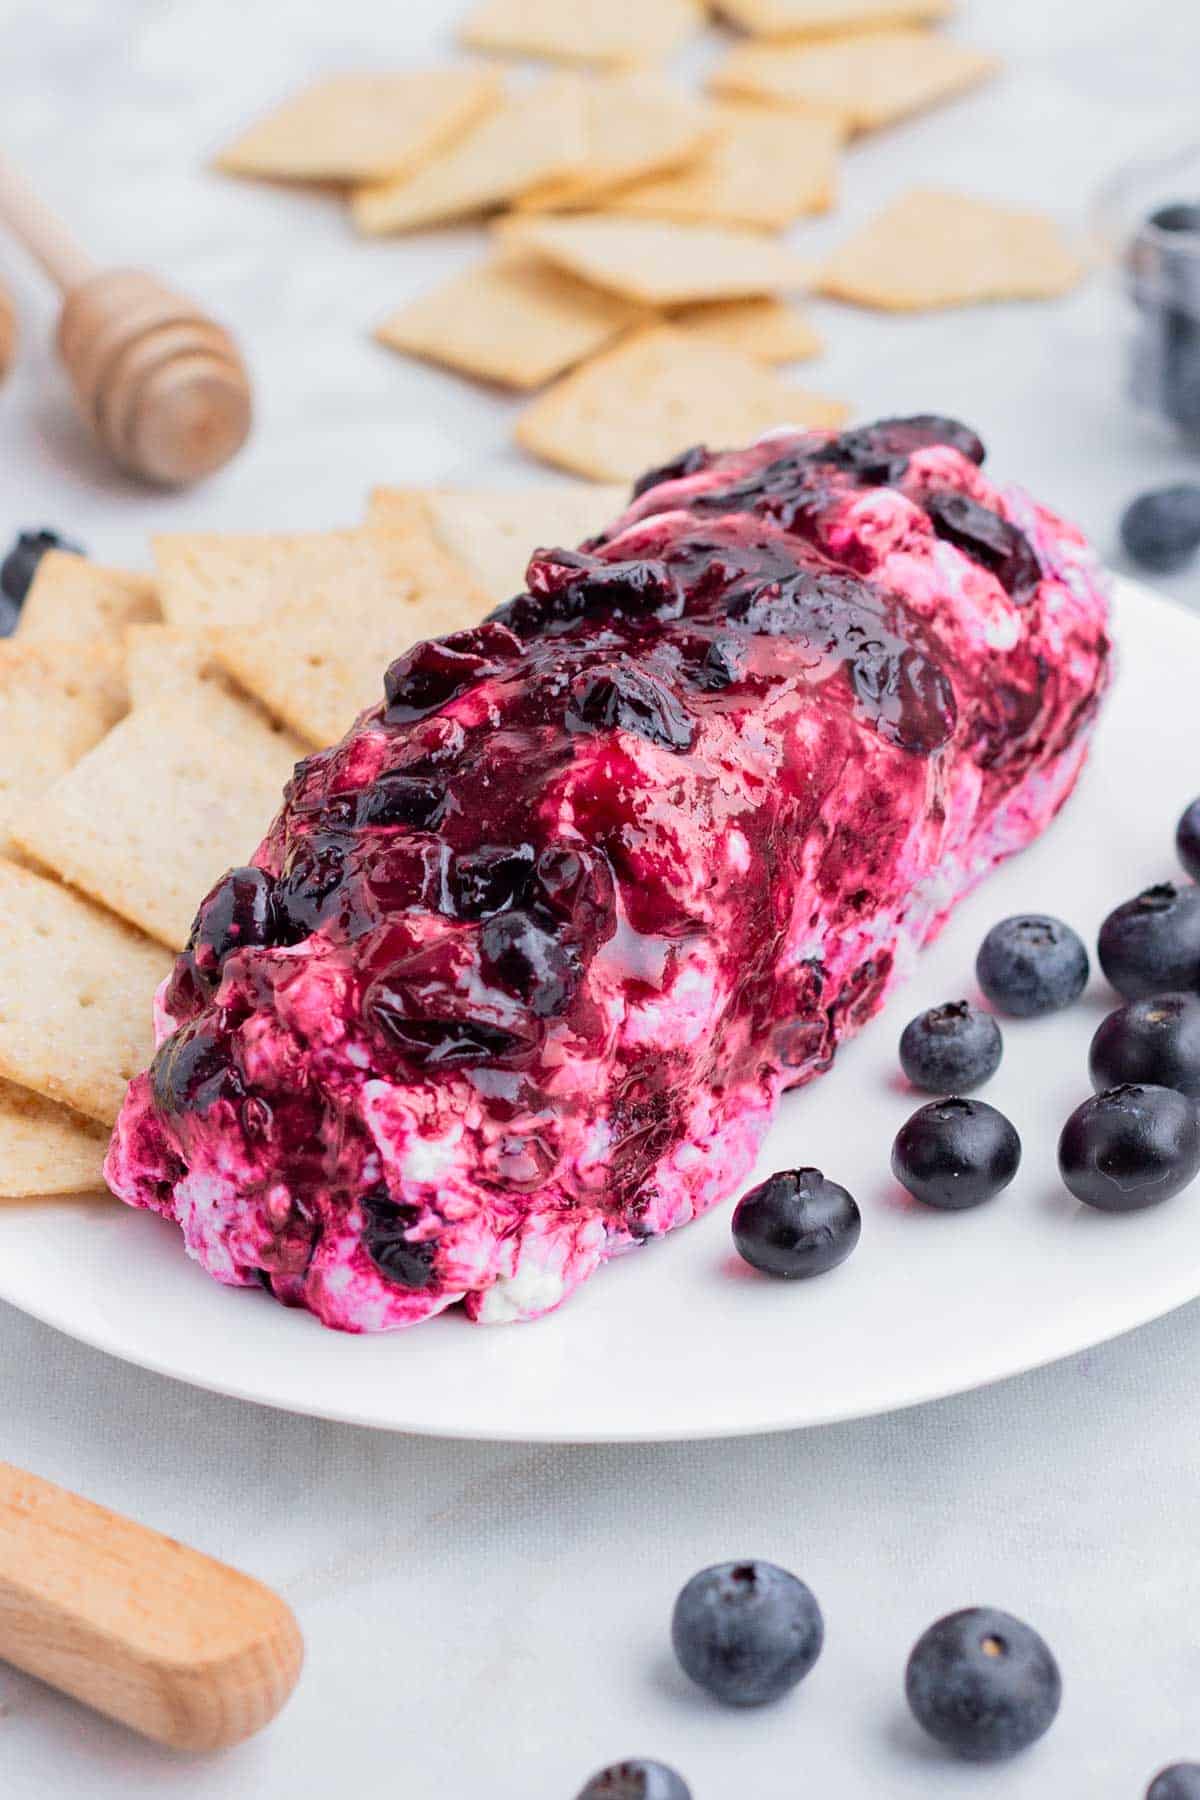 Blueberry Goat Cheese Log RECIPE served on a white plate with crackers and fresh blueberries.